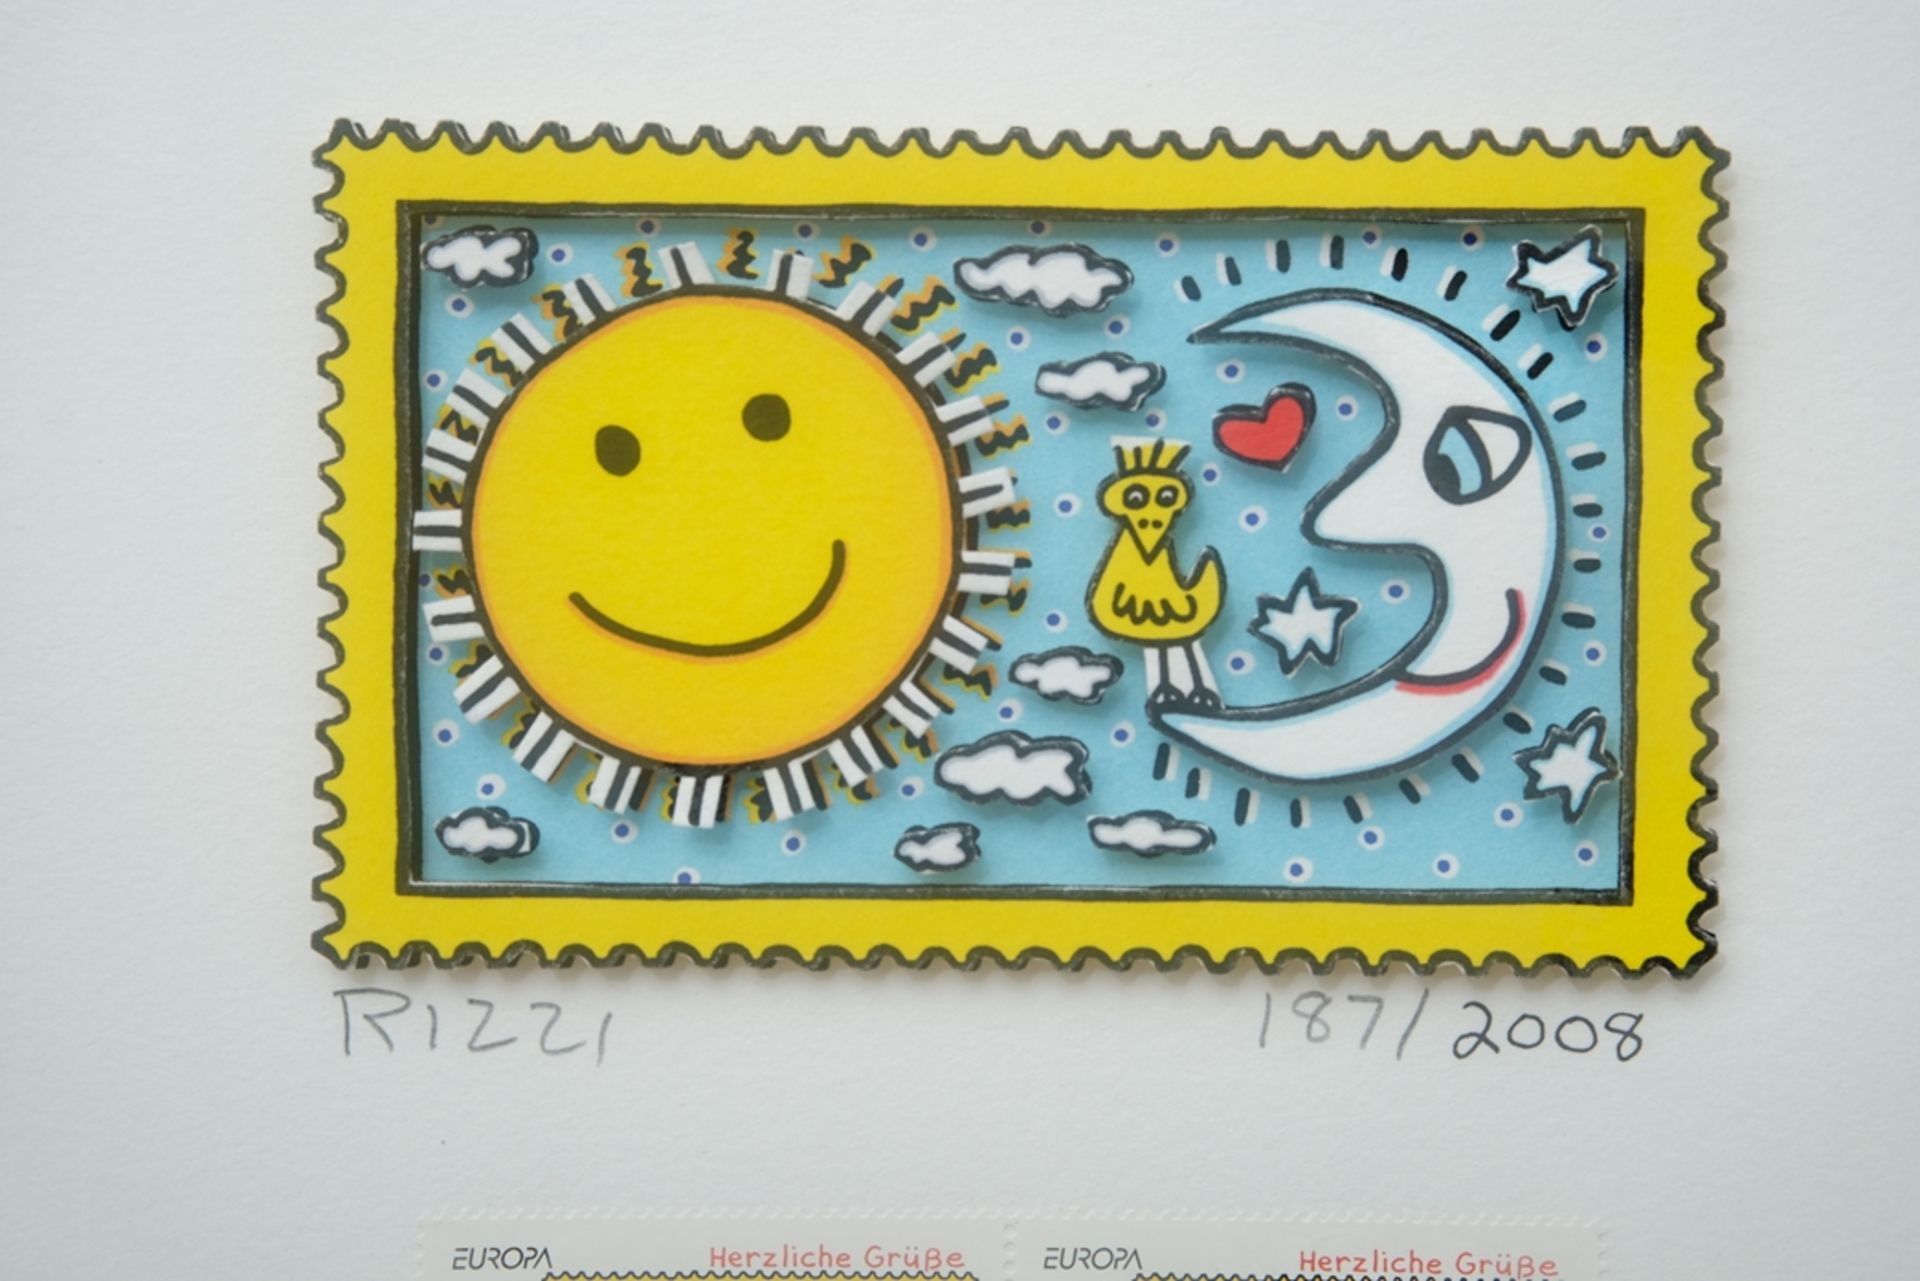 Rizzi, James (1950-2011) "Warm greetings - sun and moon", special edition stamps 2008. 3D graphic,  - Image 2 of 5